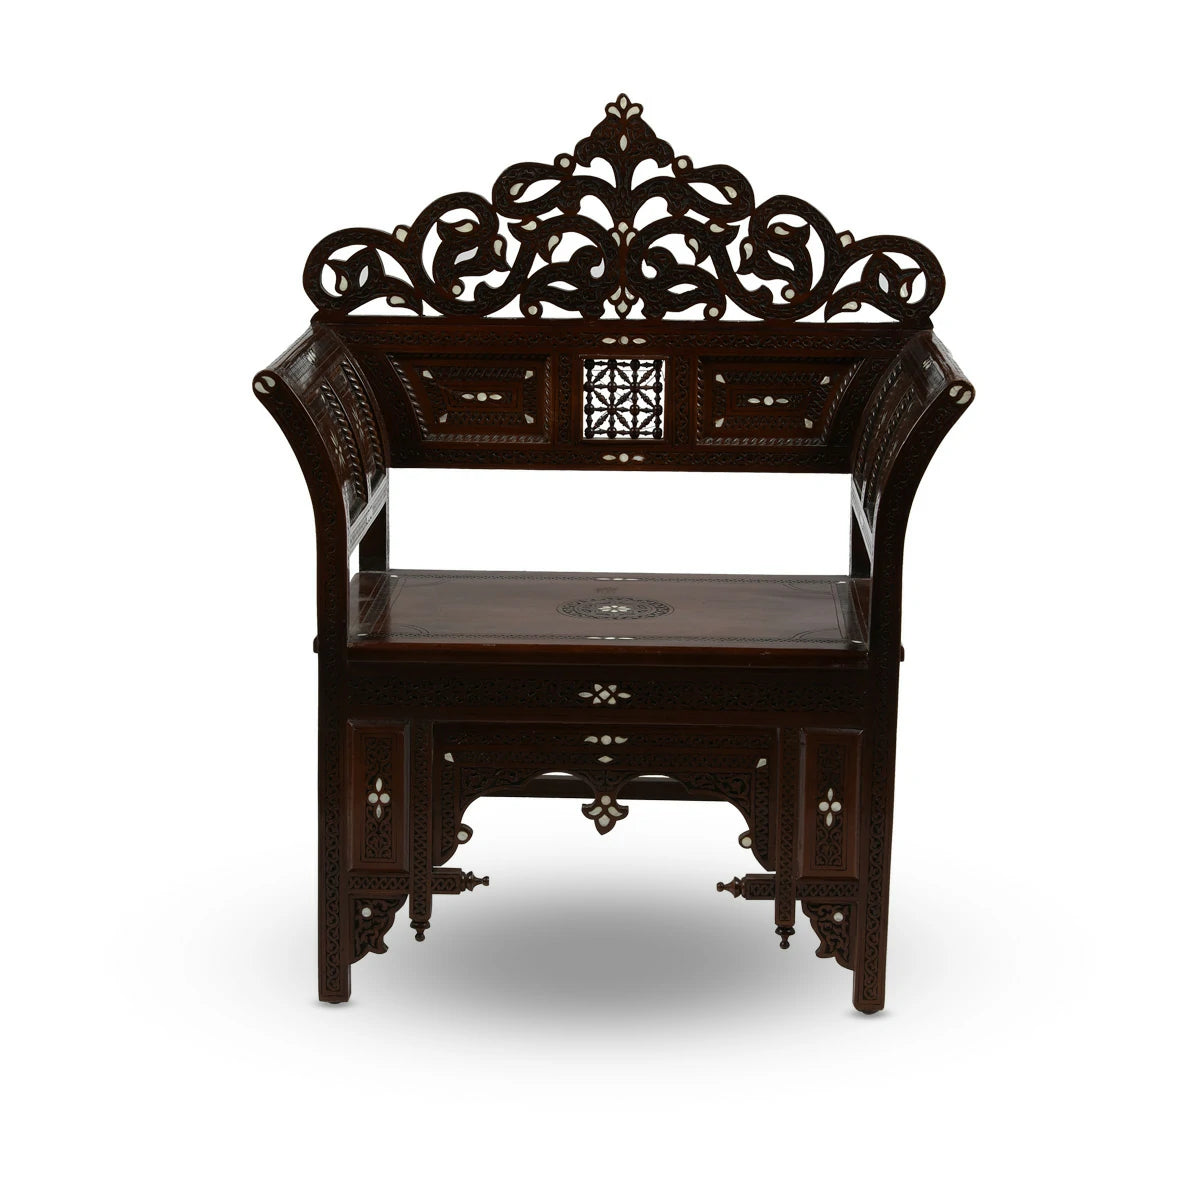 Front View of Carved Wood Syrian Suite Chair